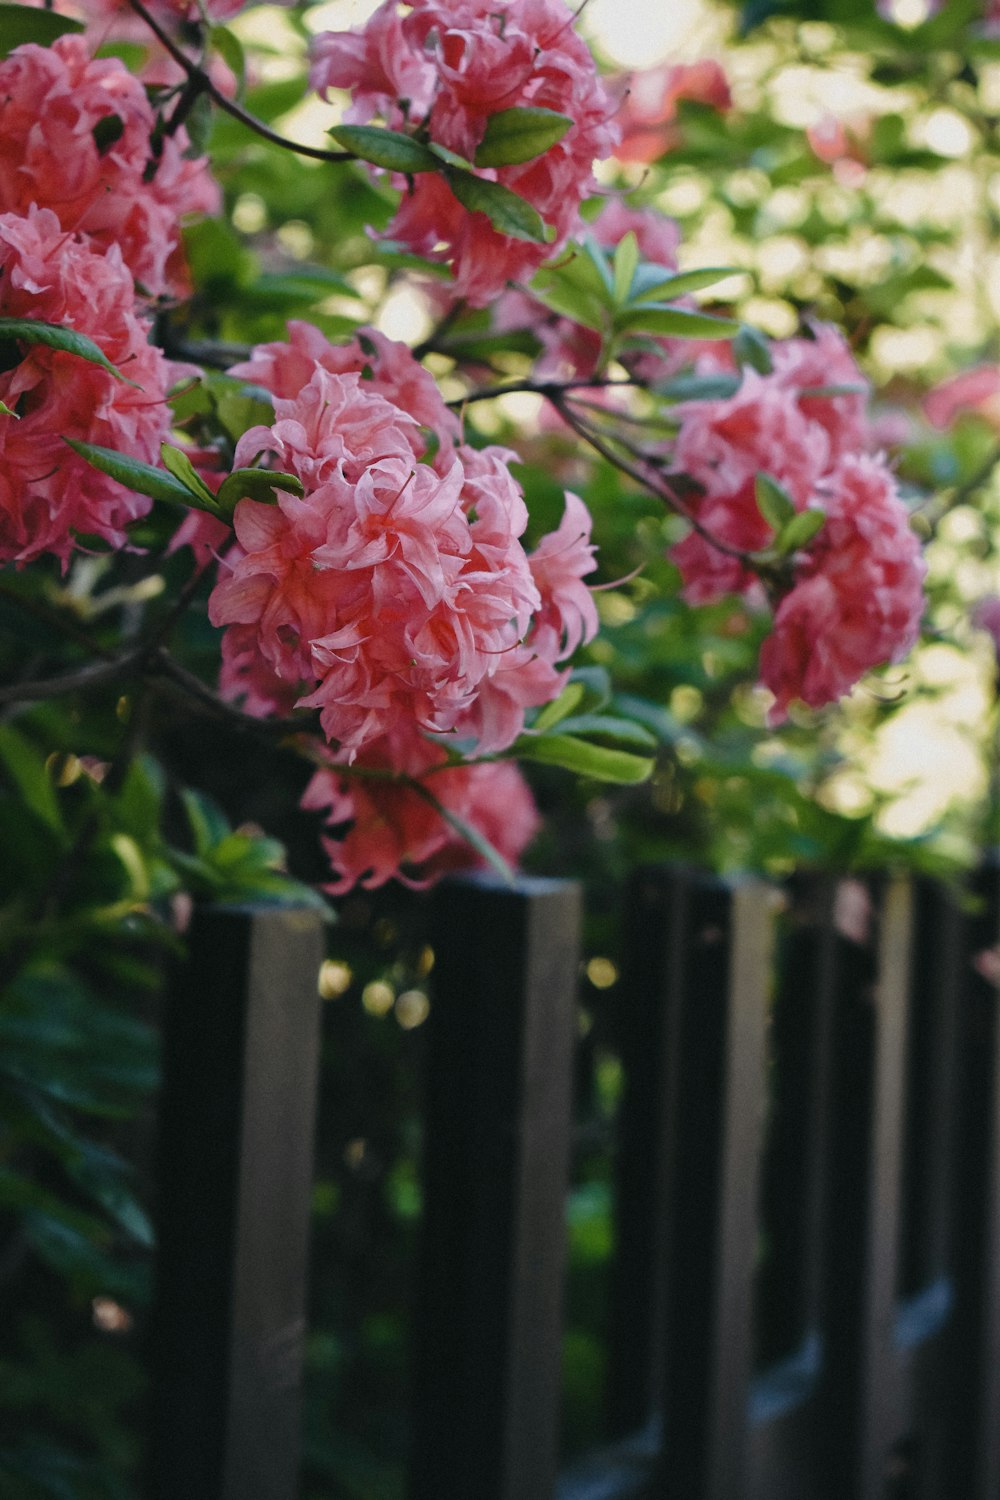 pink flowers are growing on a black fence